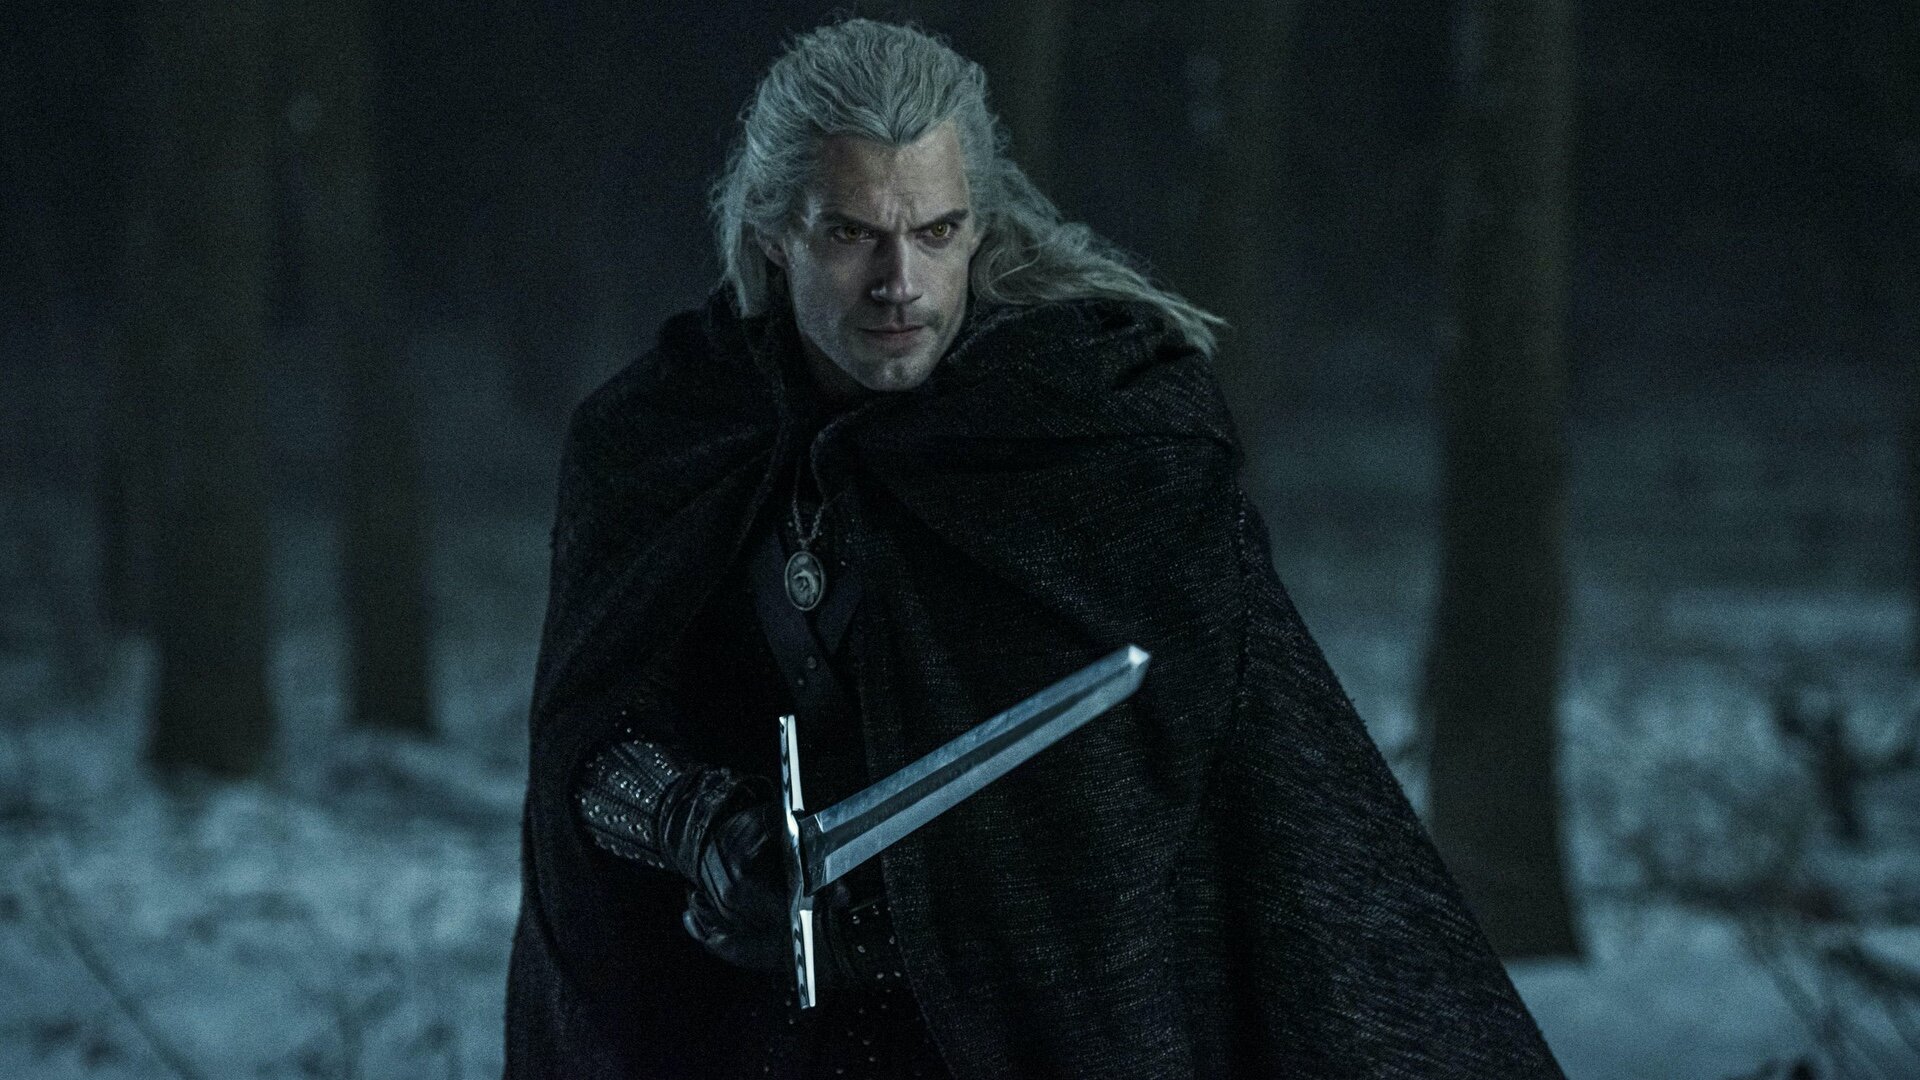 THE WITCHER: NIGHTMARE OF THE WOLF Animated Film Is a Prequel That Will Focus on Geralt's Teacher